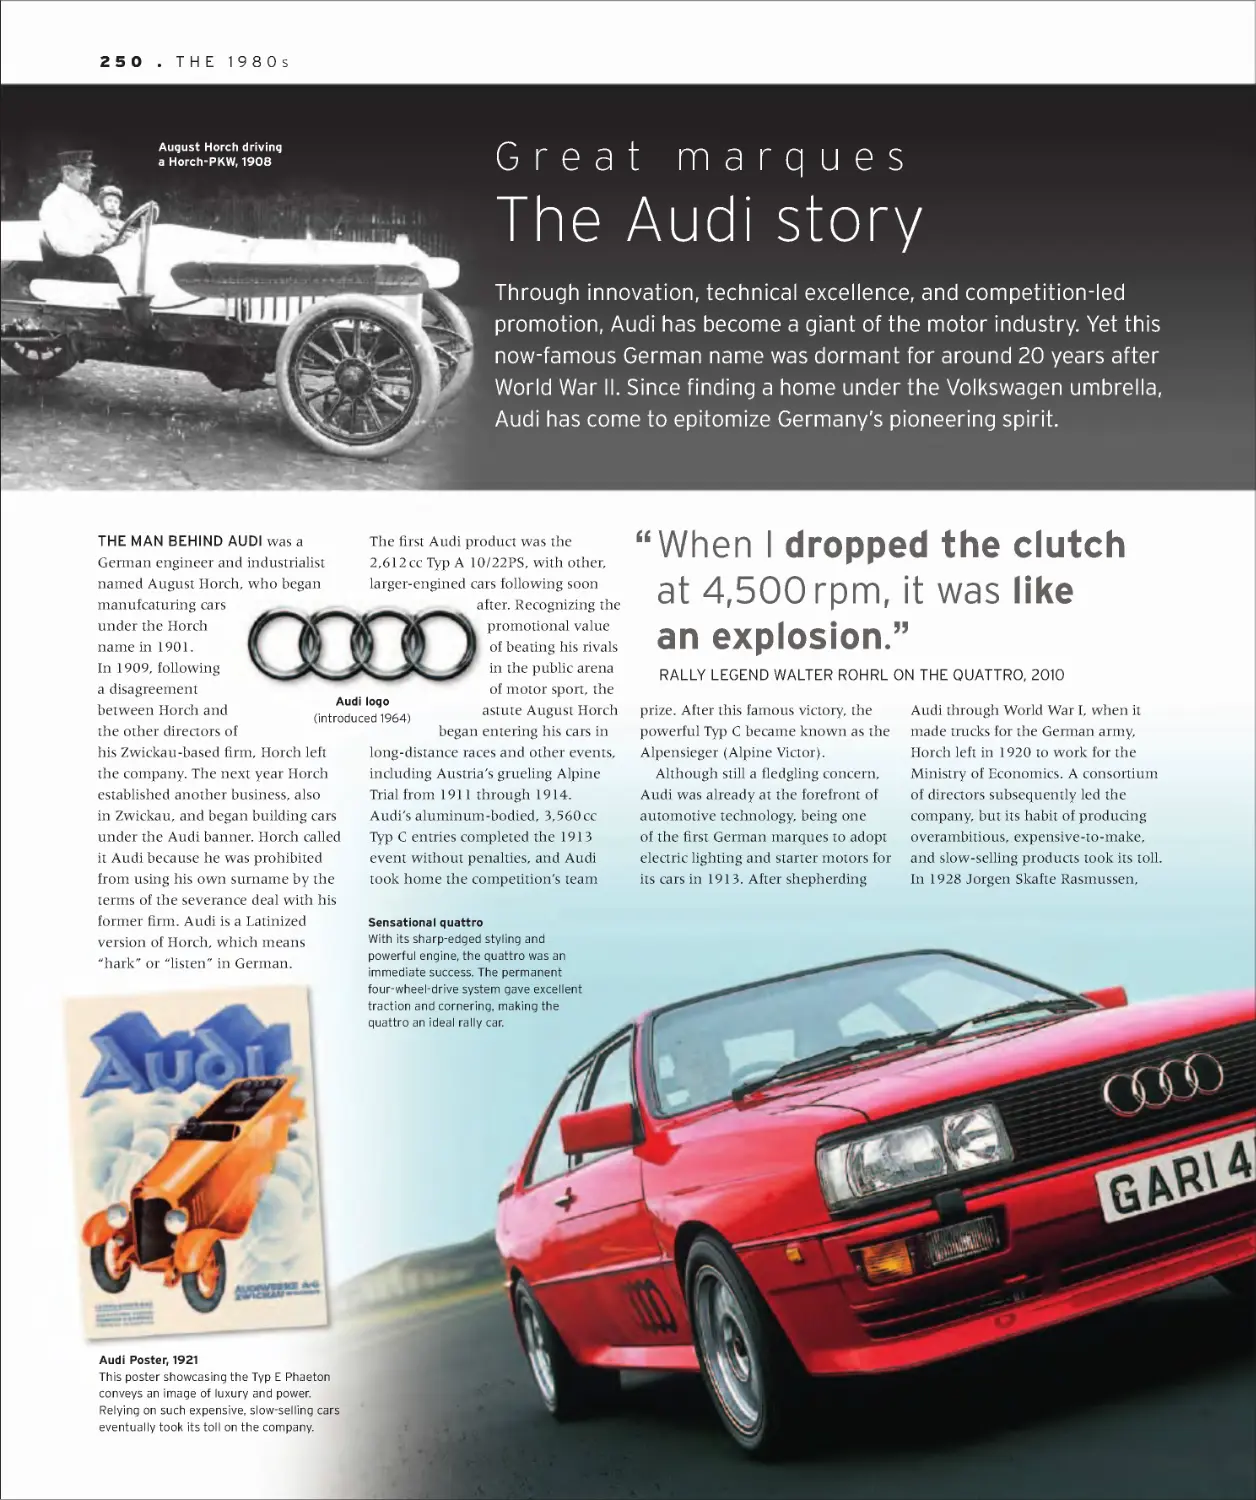 Great marques: The Audi story 250